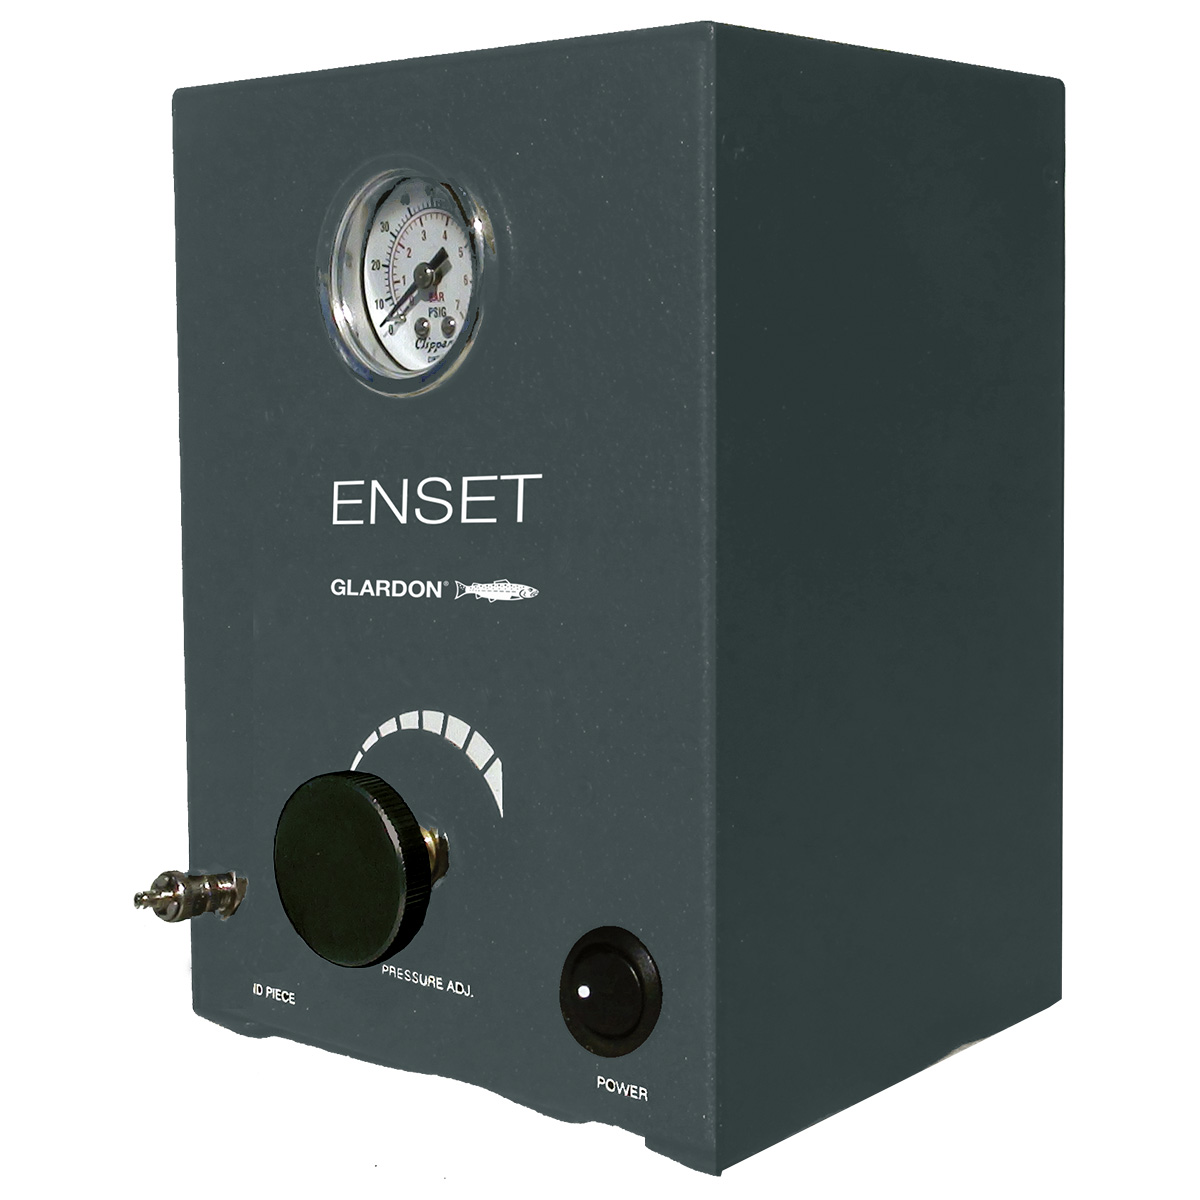 Desktop control unit EnSet Compact with single port, analog display, frequency up to 1500 hits/min